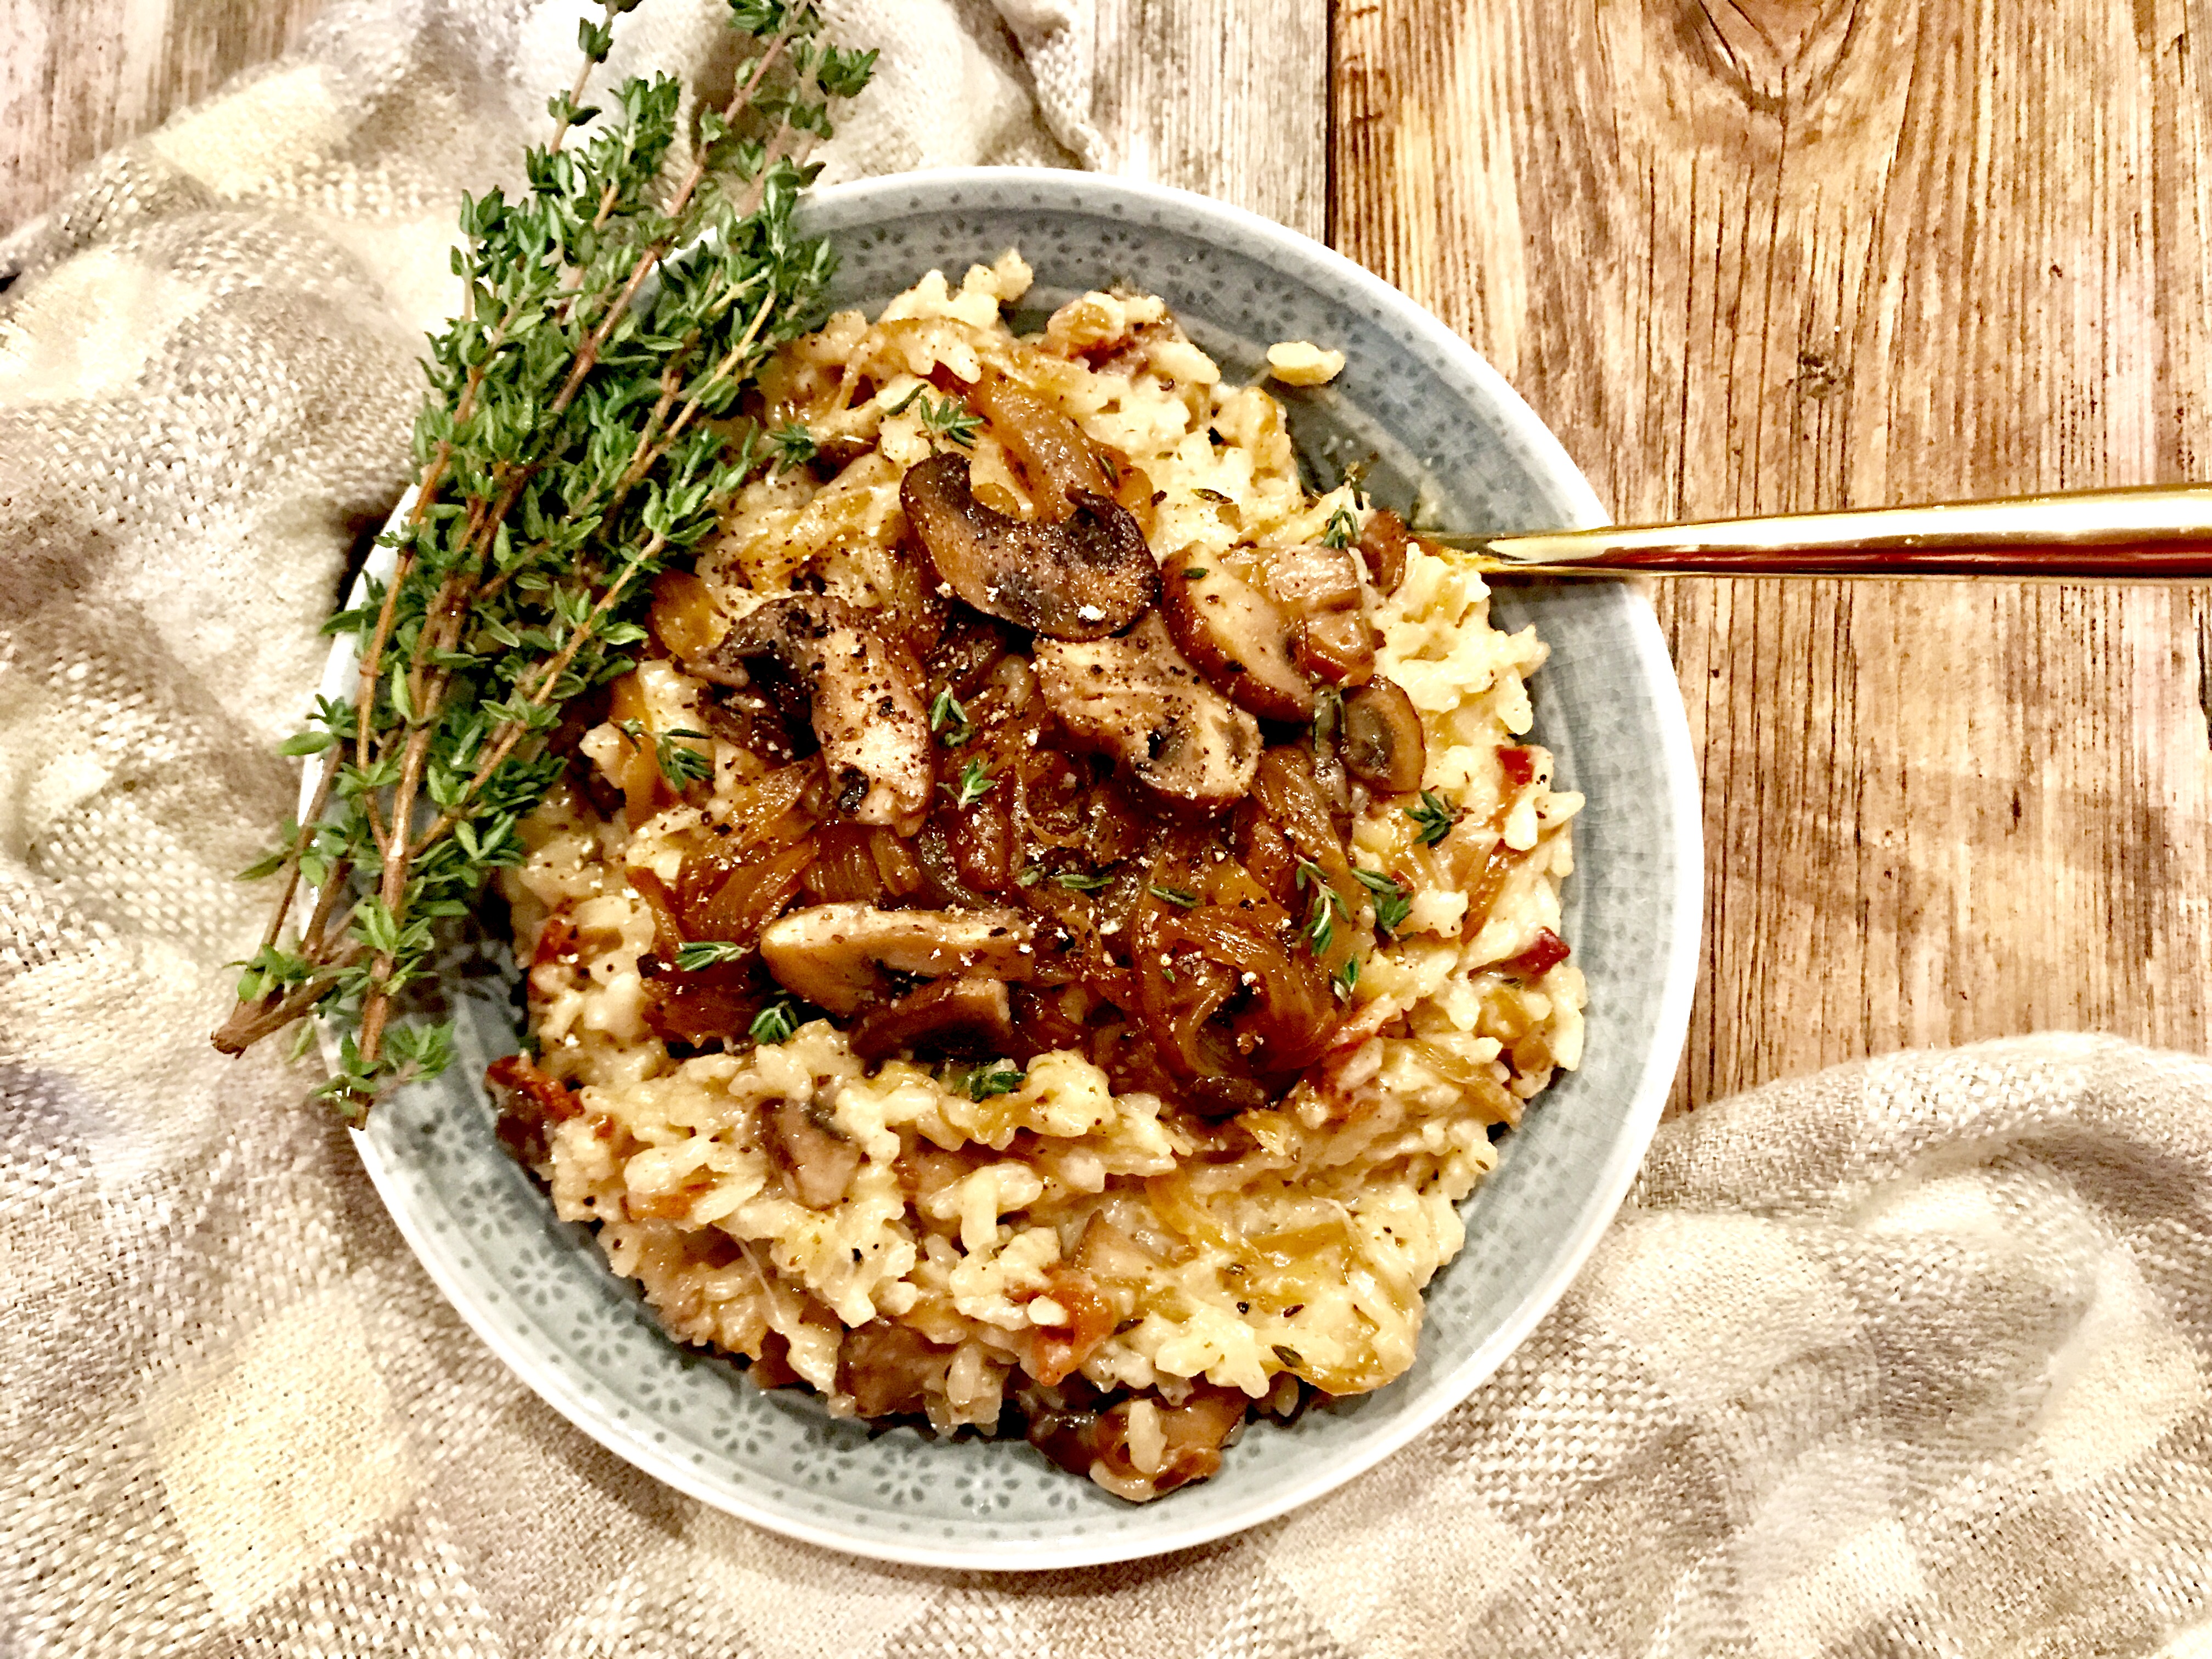 http://ahintofwine.com/wp-content/uploads/2017/12/Goat-Cheese-Risotto-with-Caramelized-Onions-and-Bacon.jpg